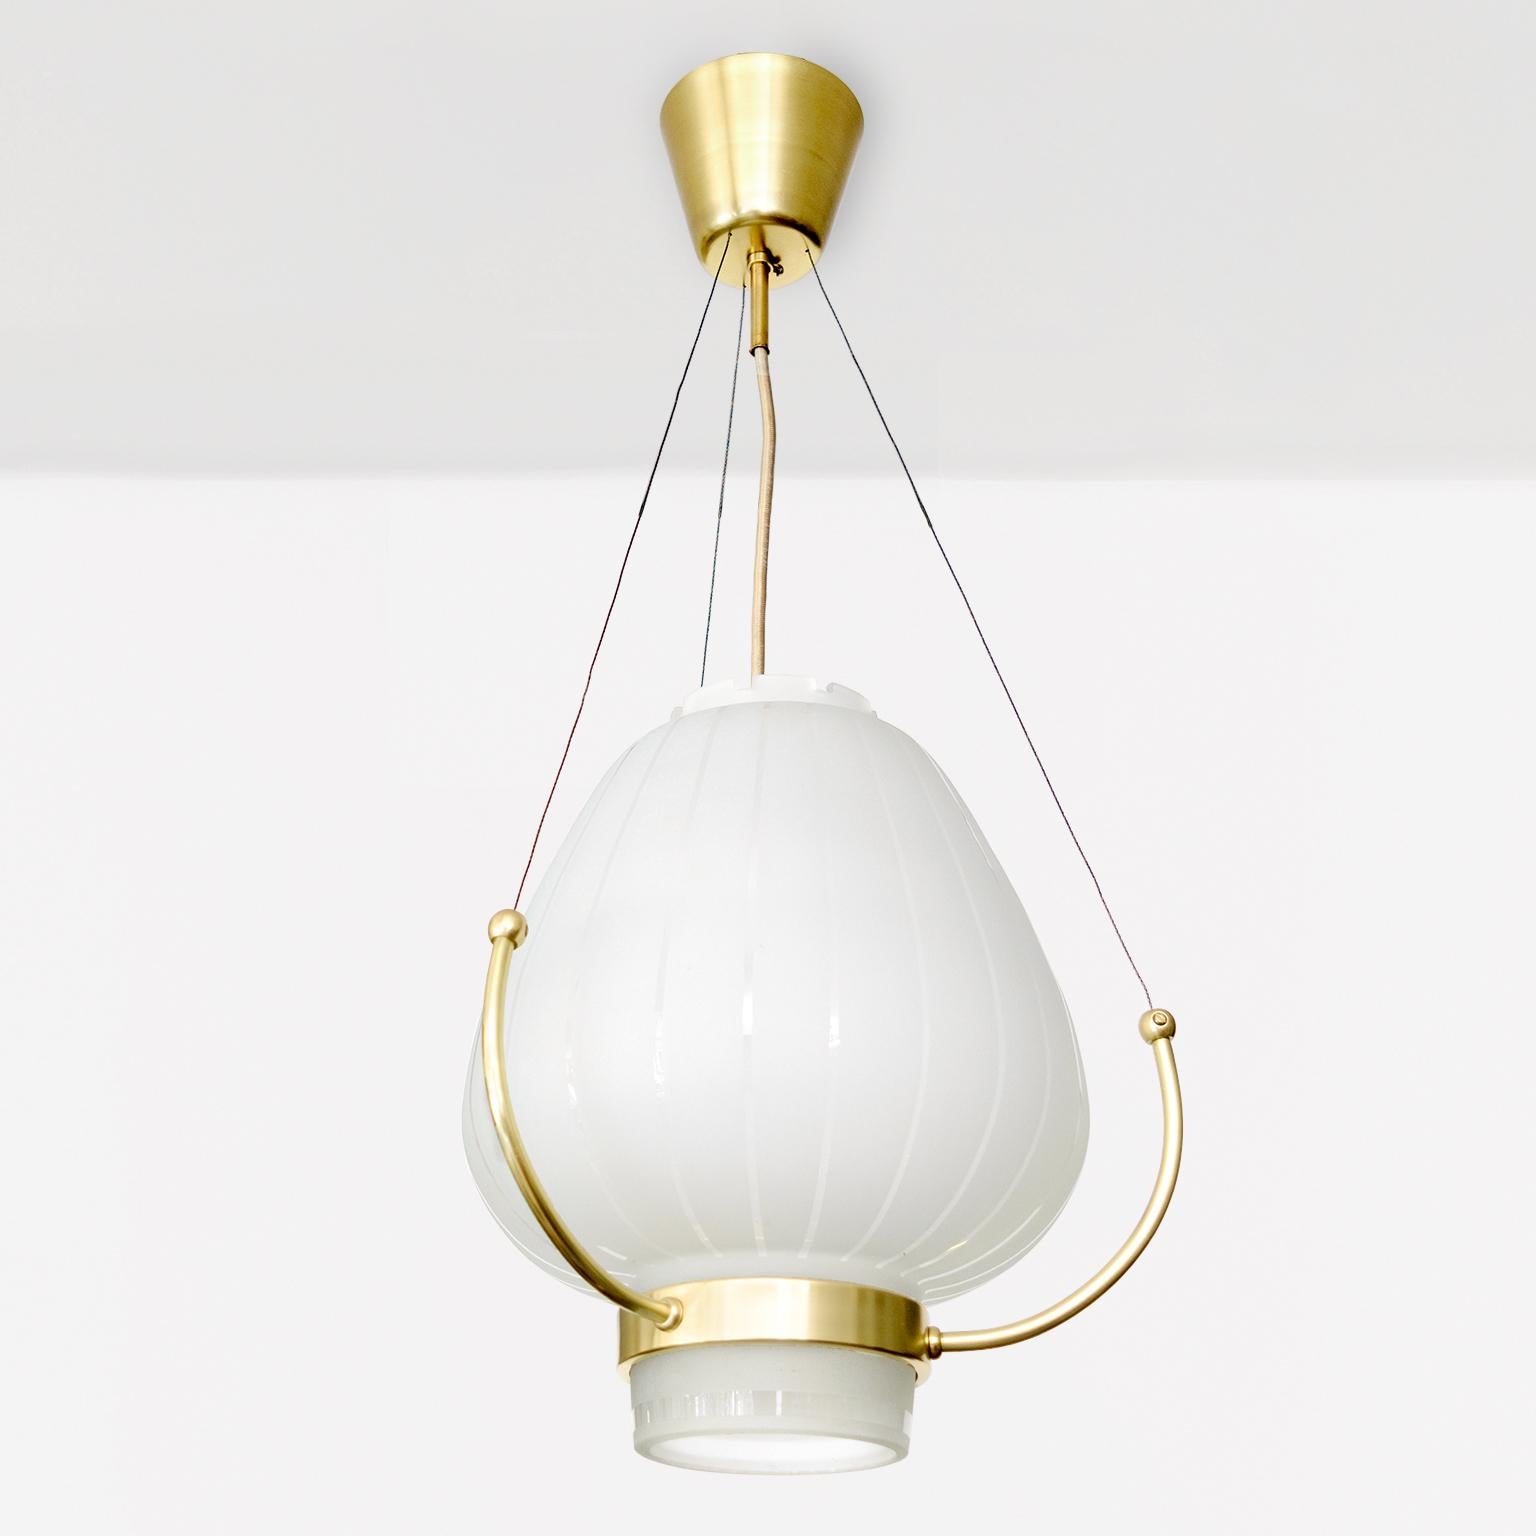 Orrefors (Sweden) attributed ceiling lamp circa 1930s / 40s, with a bulbous acid etched and polished center glass shade. The three arm bracket is suspended by wires which connect to the canopy.. The top opening has a notched border, the fixture’s